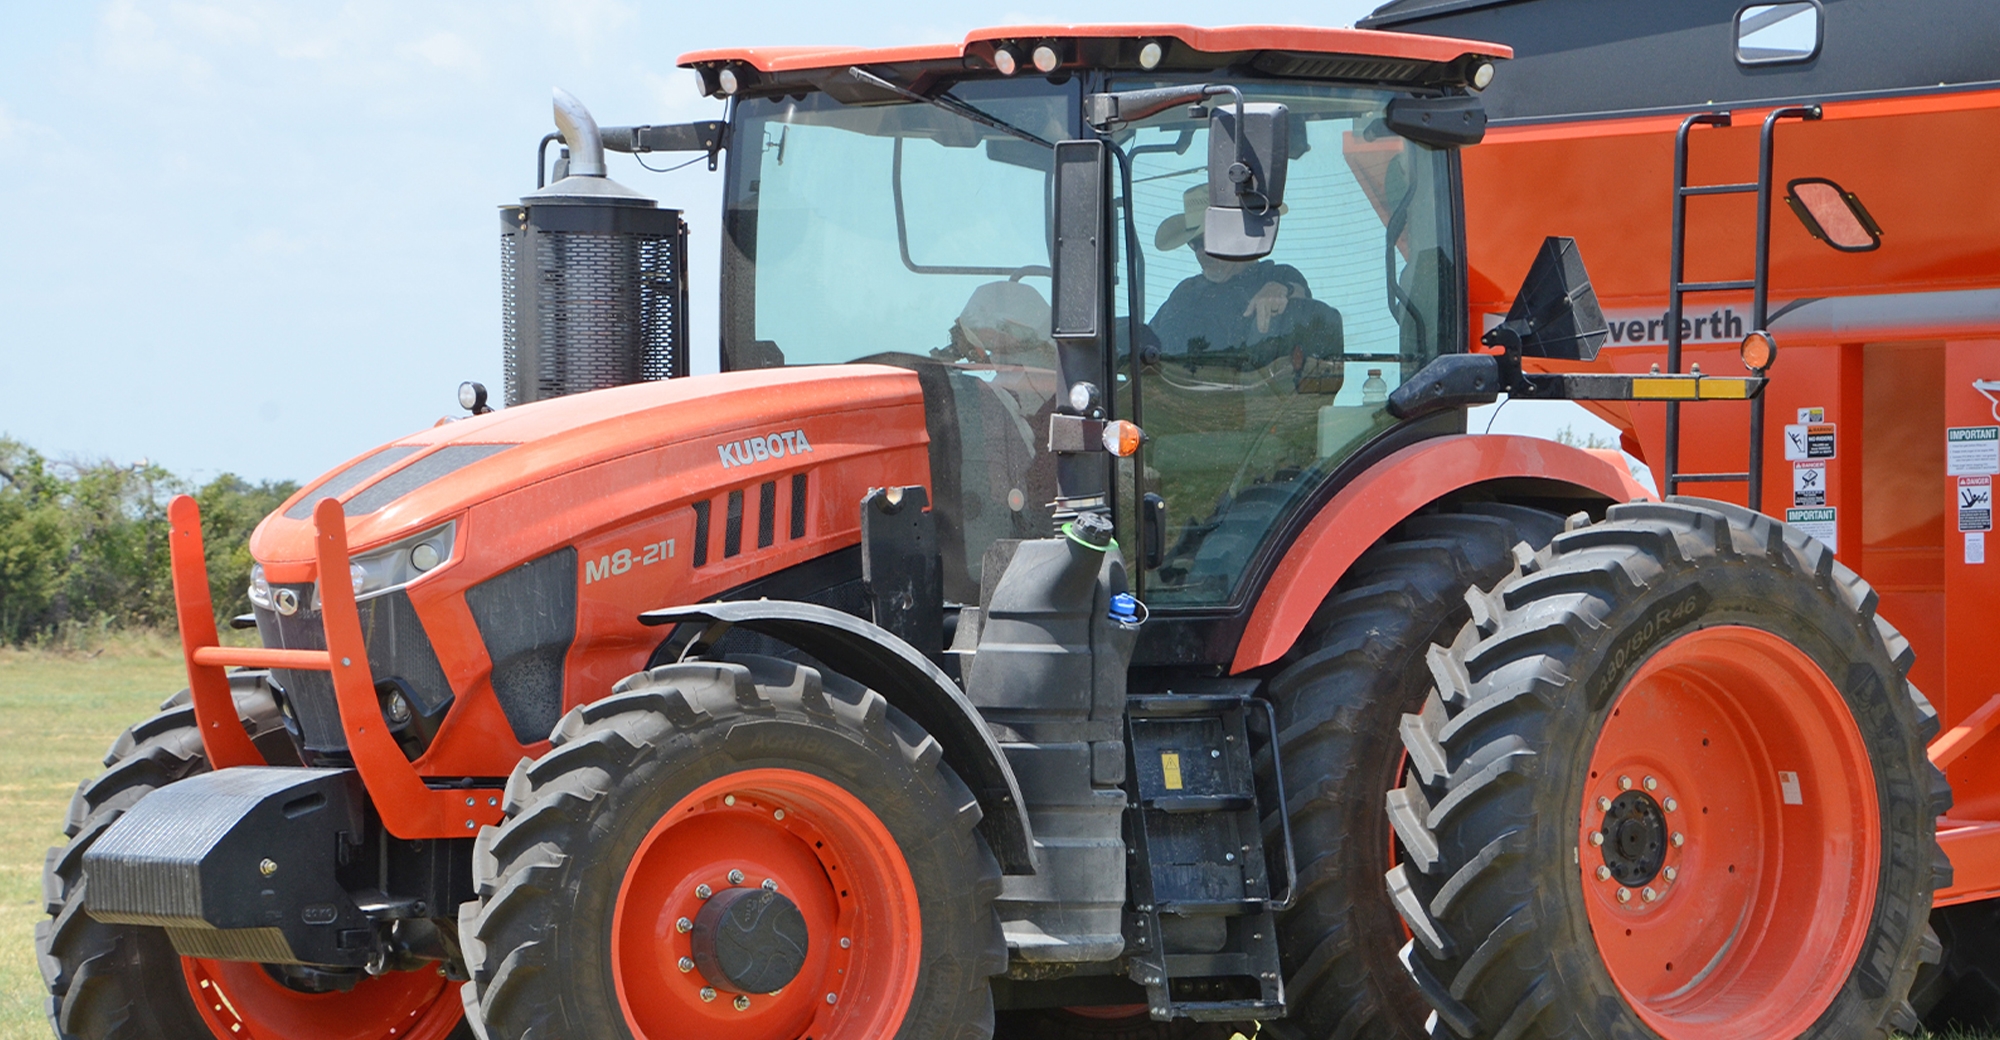 Taking a closer look at the Kubota M8